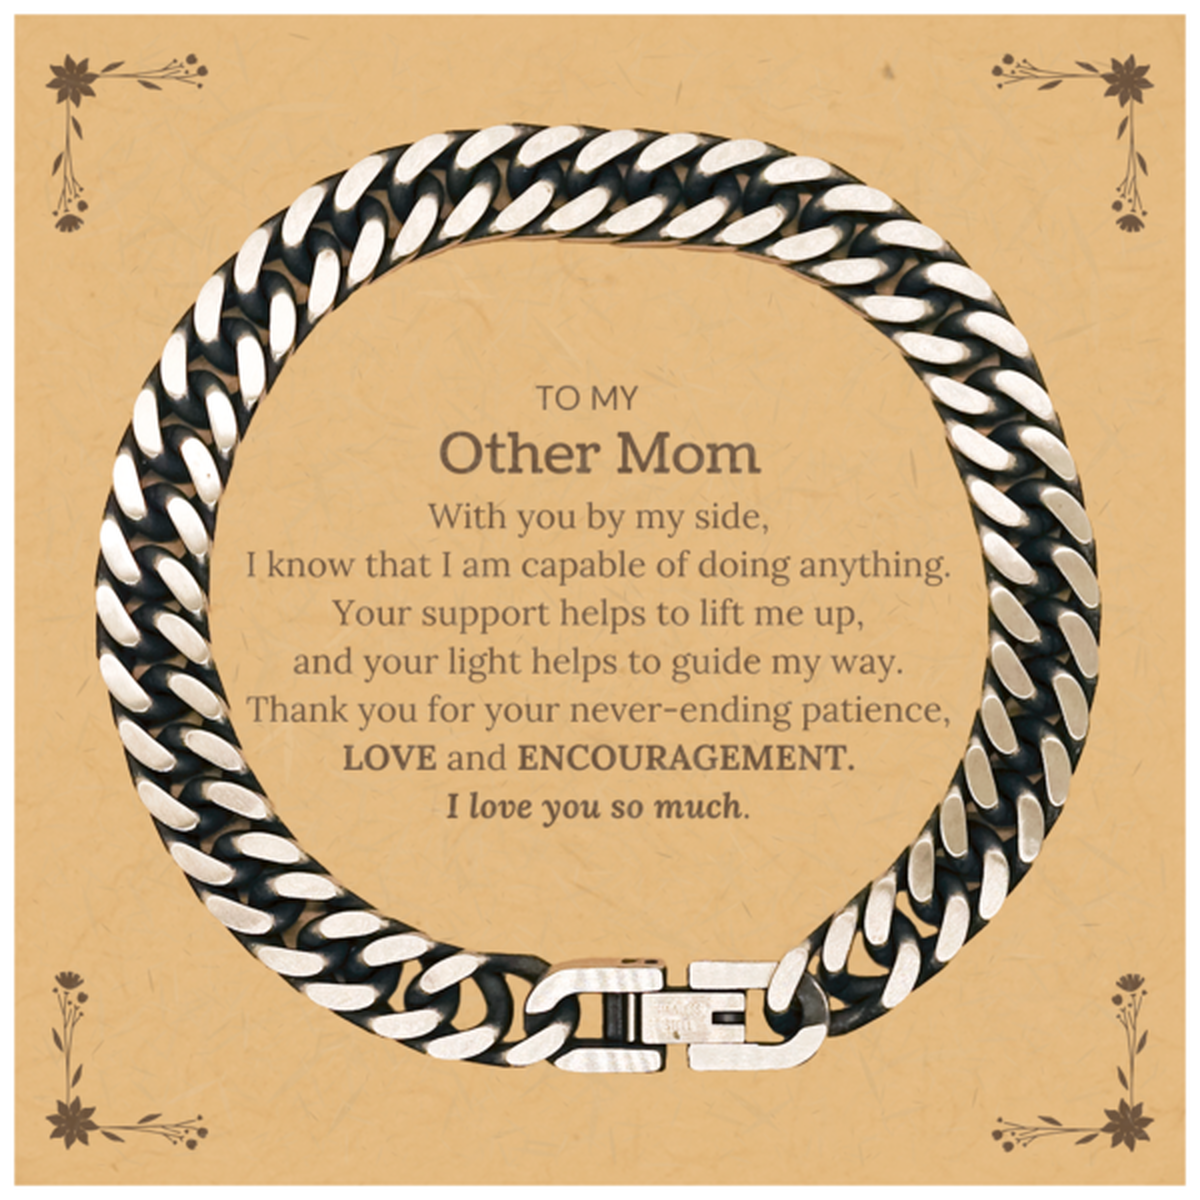 Appreciation Other Mom Cuban Link Chain Bracelet Gifts, To My Other Mom Birthday Christmas Wedding Keepsake Gifts for Other Mom With you by my side, I know that I am capable of doing anything. I love you so much